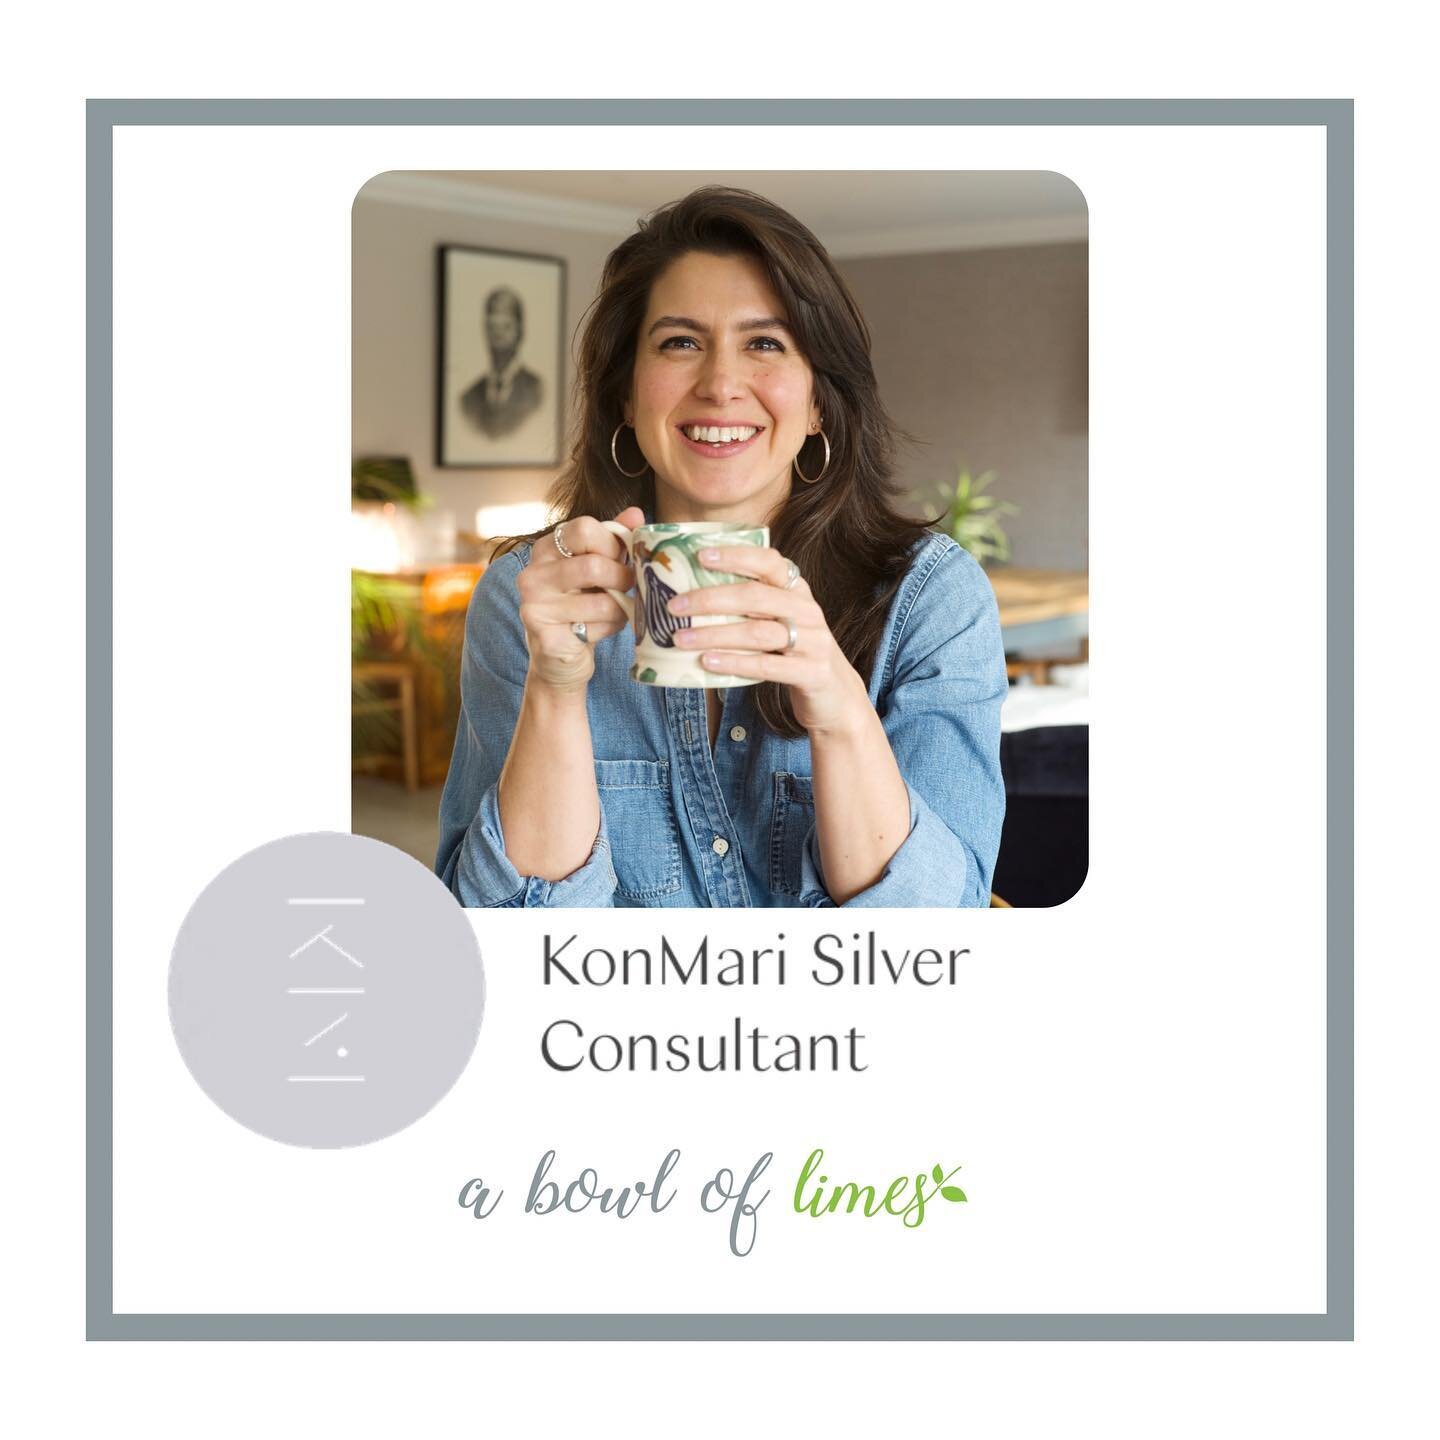 So excited to have levelled up to Silver KonMari Consultant! ✨ 

Feeling so much gratitude towards all my wonderful clients for allowing me to share their KonMari journeys, as they de-clutter, organise &amp; simplify their lives.

As a certified KonM